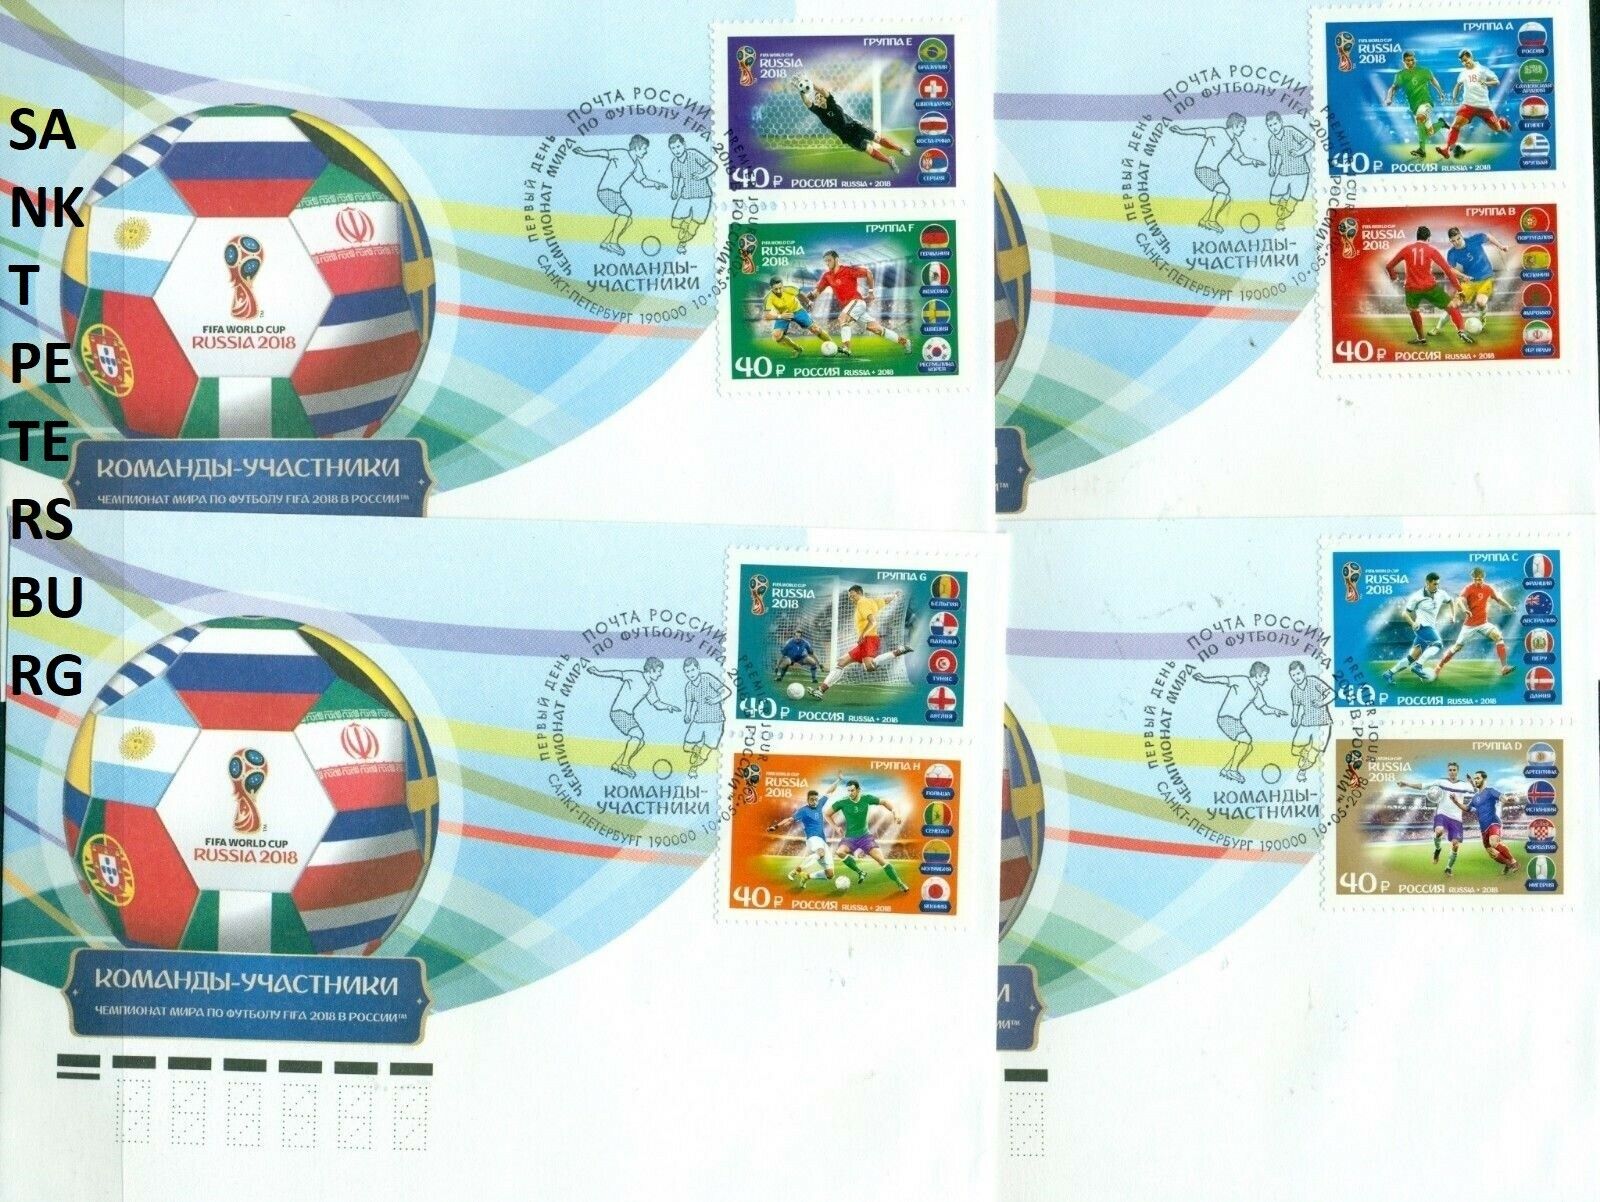 Russia 2018 Cachet Fdc Fifa World Cup Soccer Teams, 4 St. Petersburg Post Marks